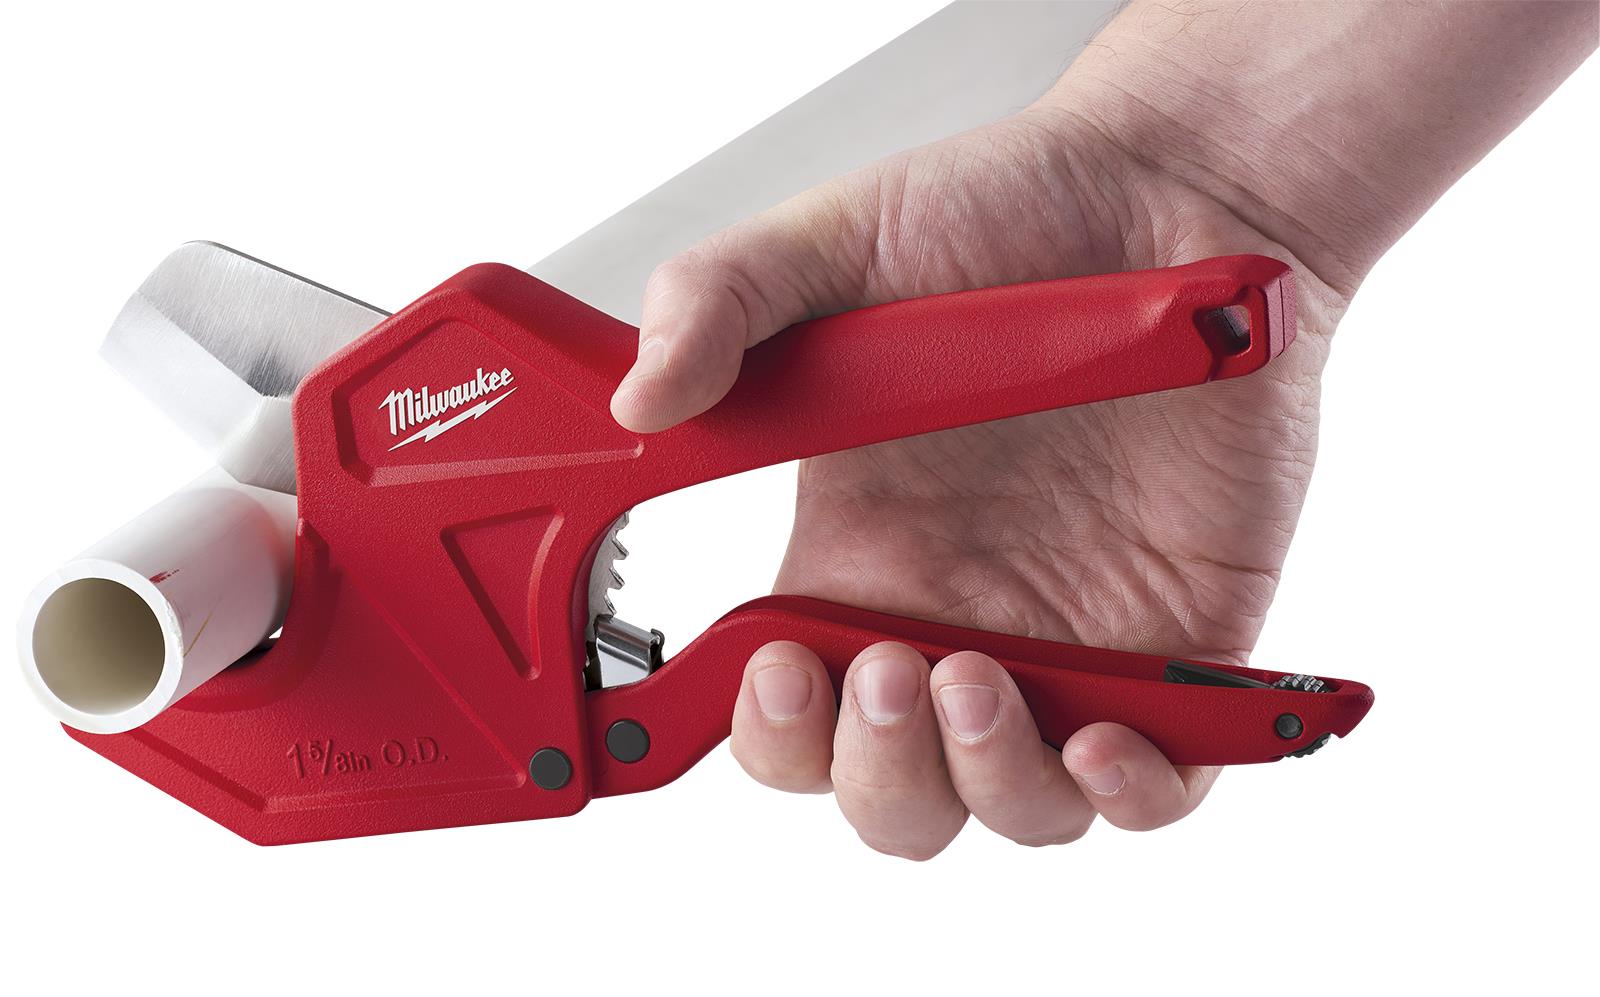 Husky PVC Pipe Cutter was a No-Brainer